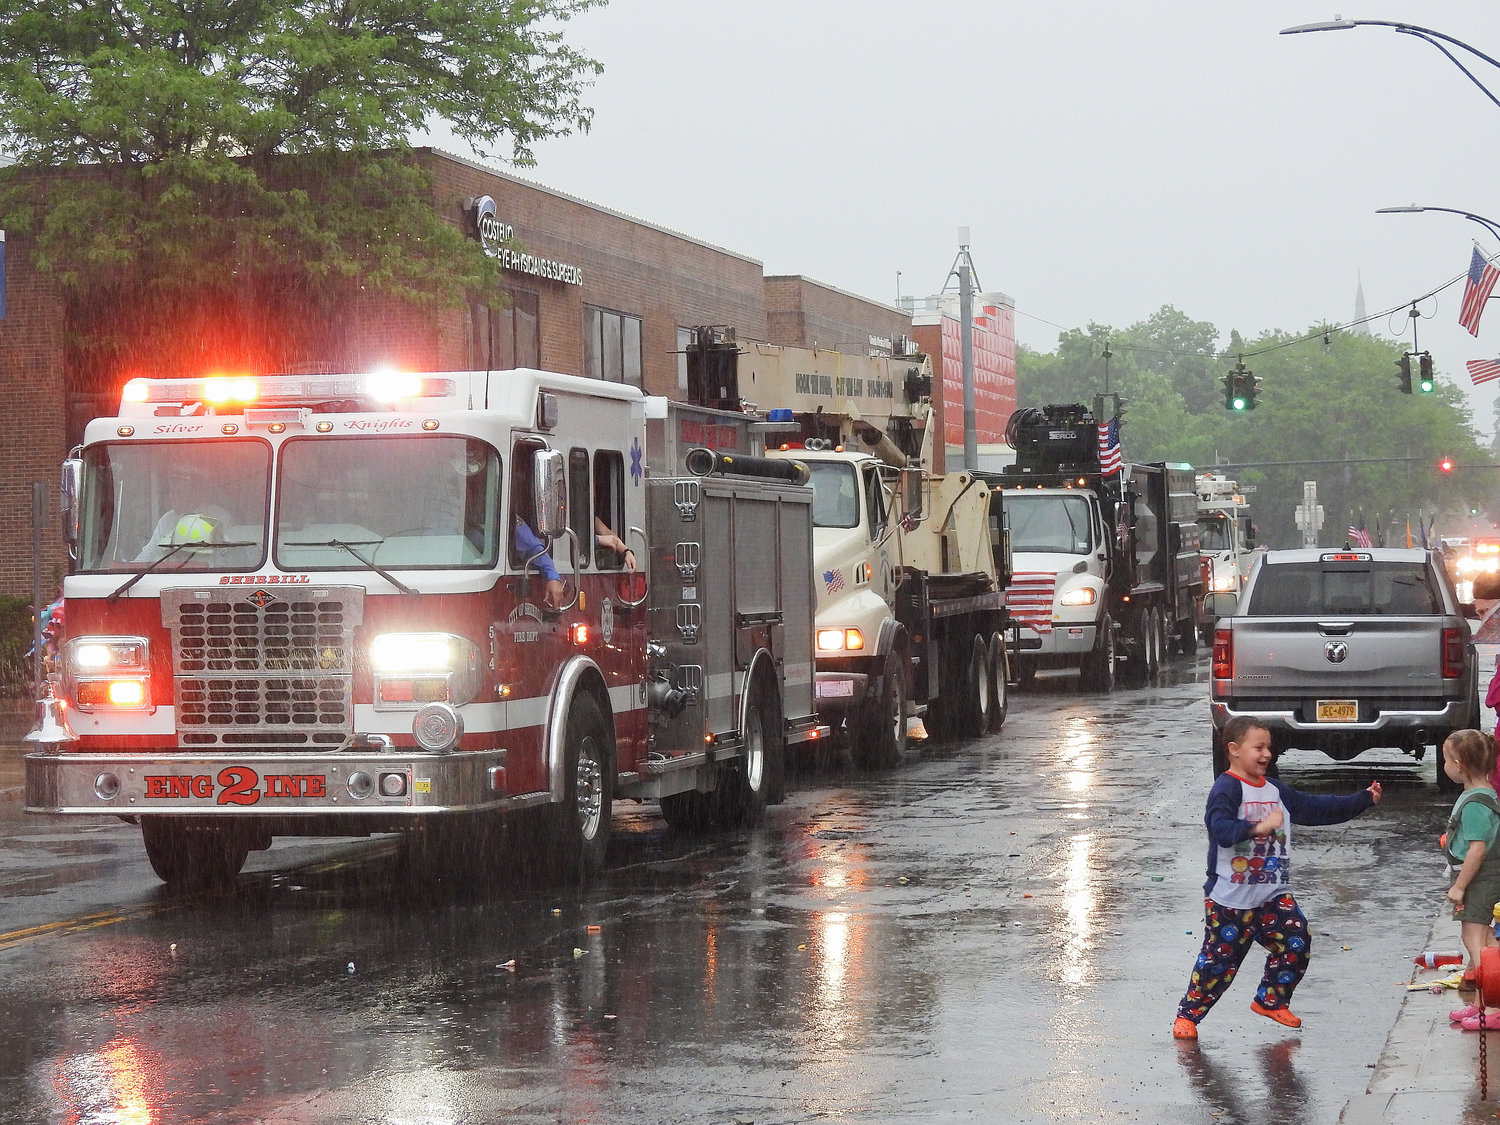 GALLERY Oneida City Memorial Day Parade May 27, 2022 Daily Sentinel